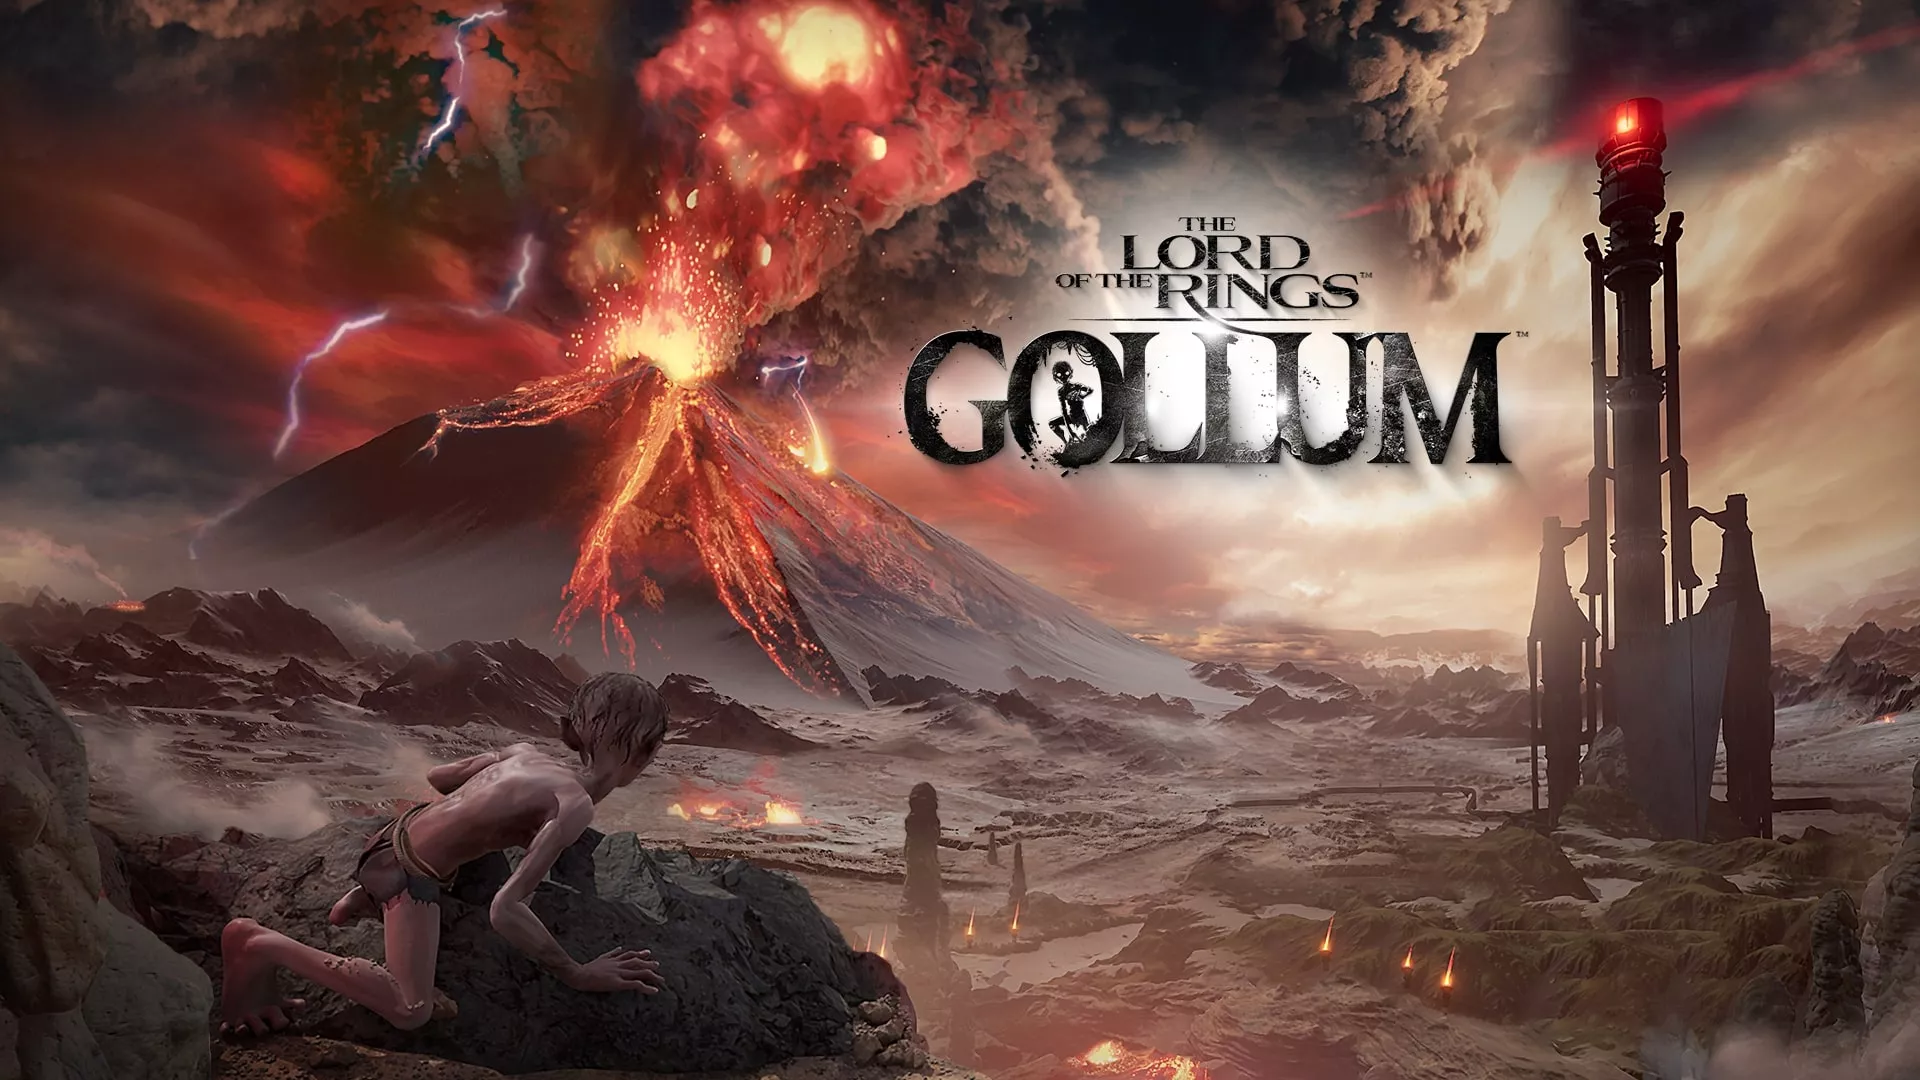 The Lord of the Rings: Gollum - Cinematic Trailer veröffentlicht Heropic